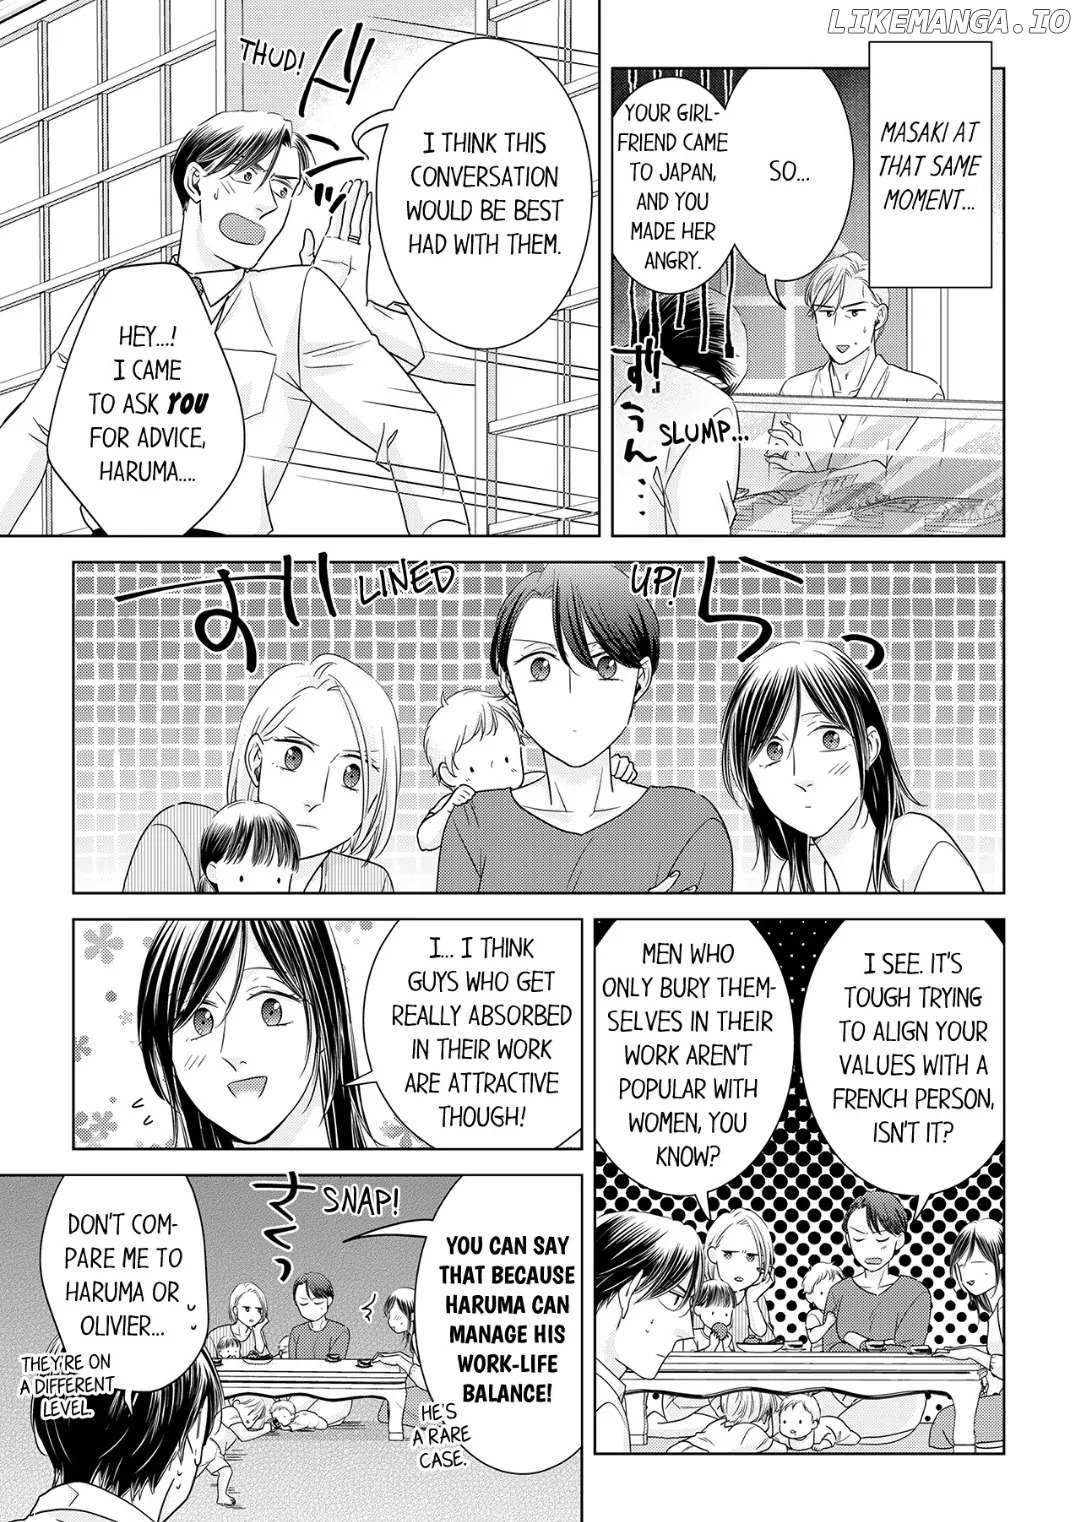 King Of Popularity - Page 1